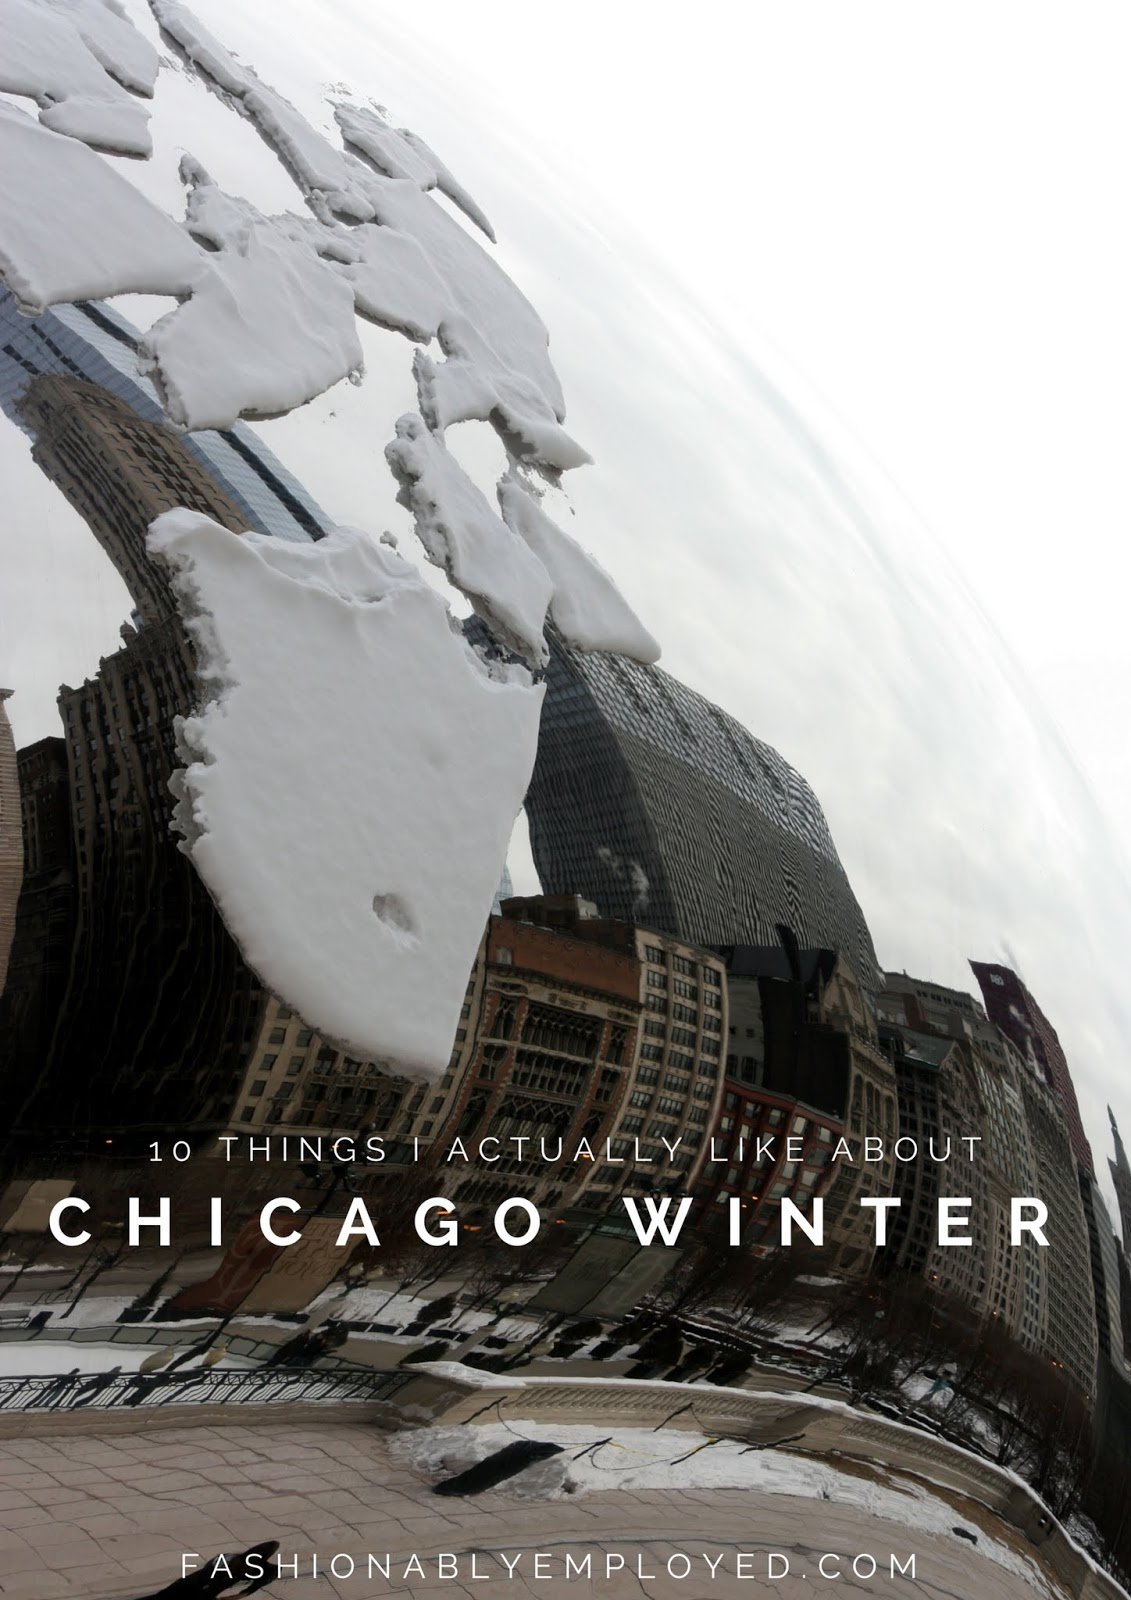 10 Things I Actually Like About Chicago Winter